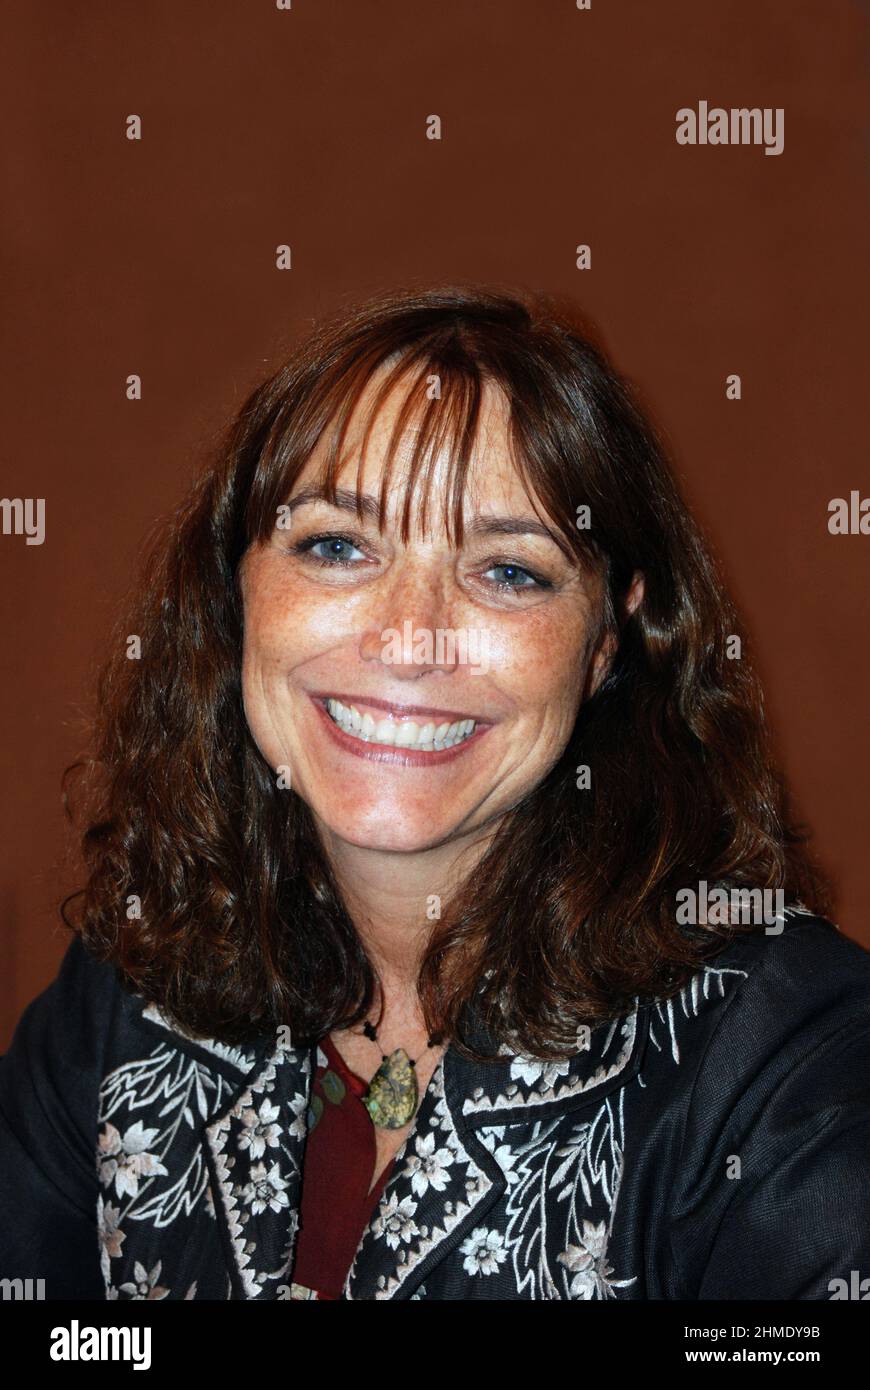 Karen Allen, American film, TV, stage actress & theatre director. Known for Animal House, Indiana Jones, Raiders of the Lost Ark, Scrooged & Starman. Stock Photo